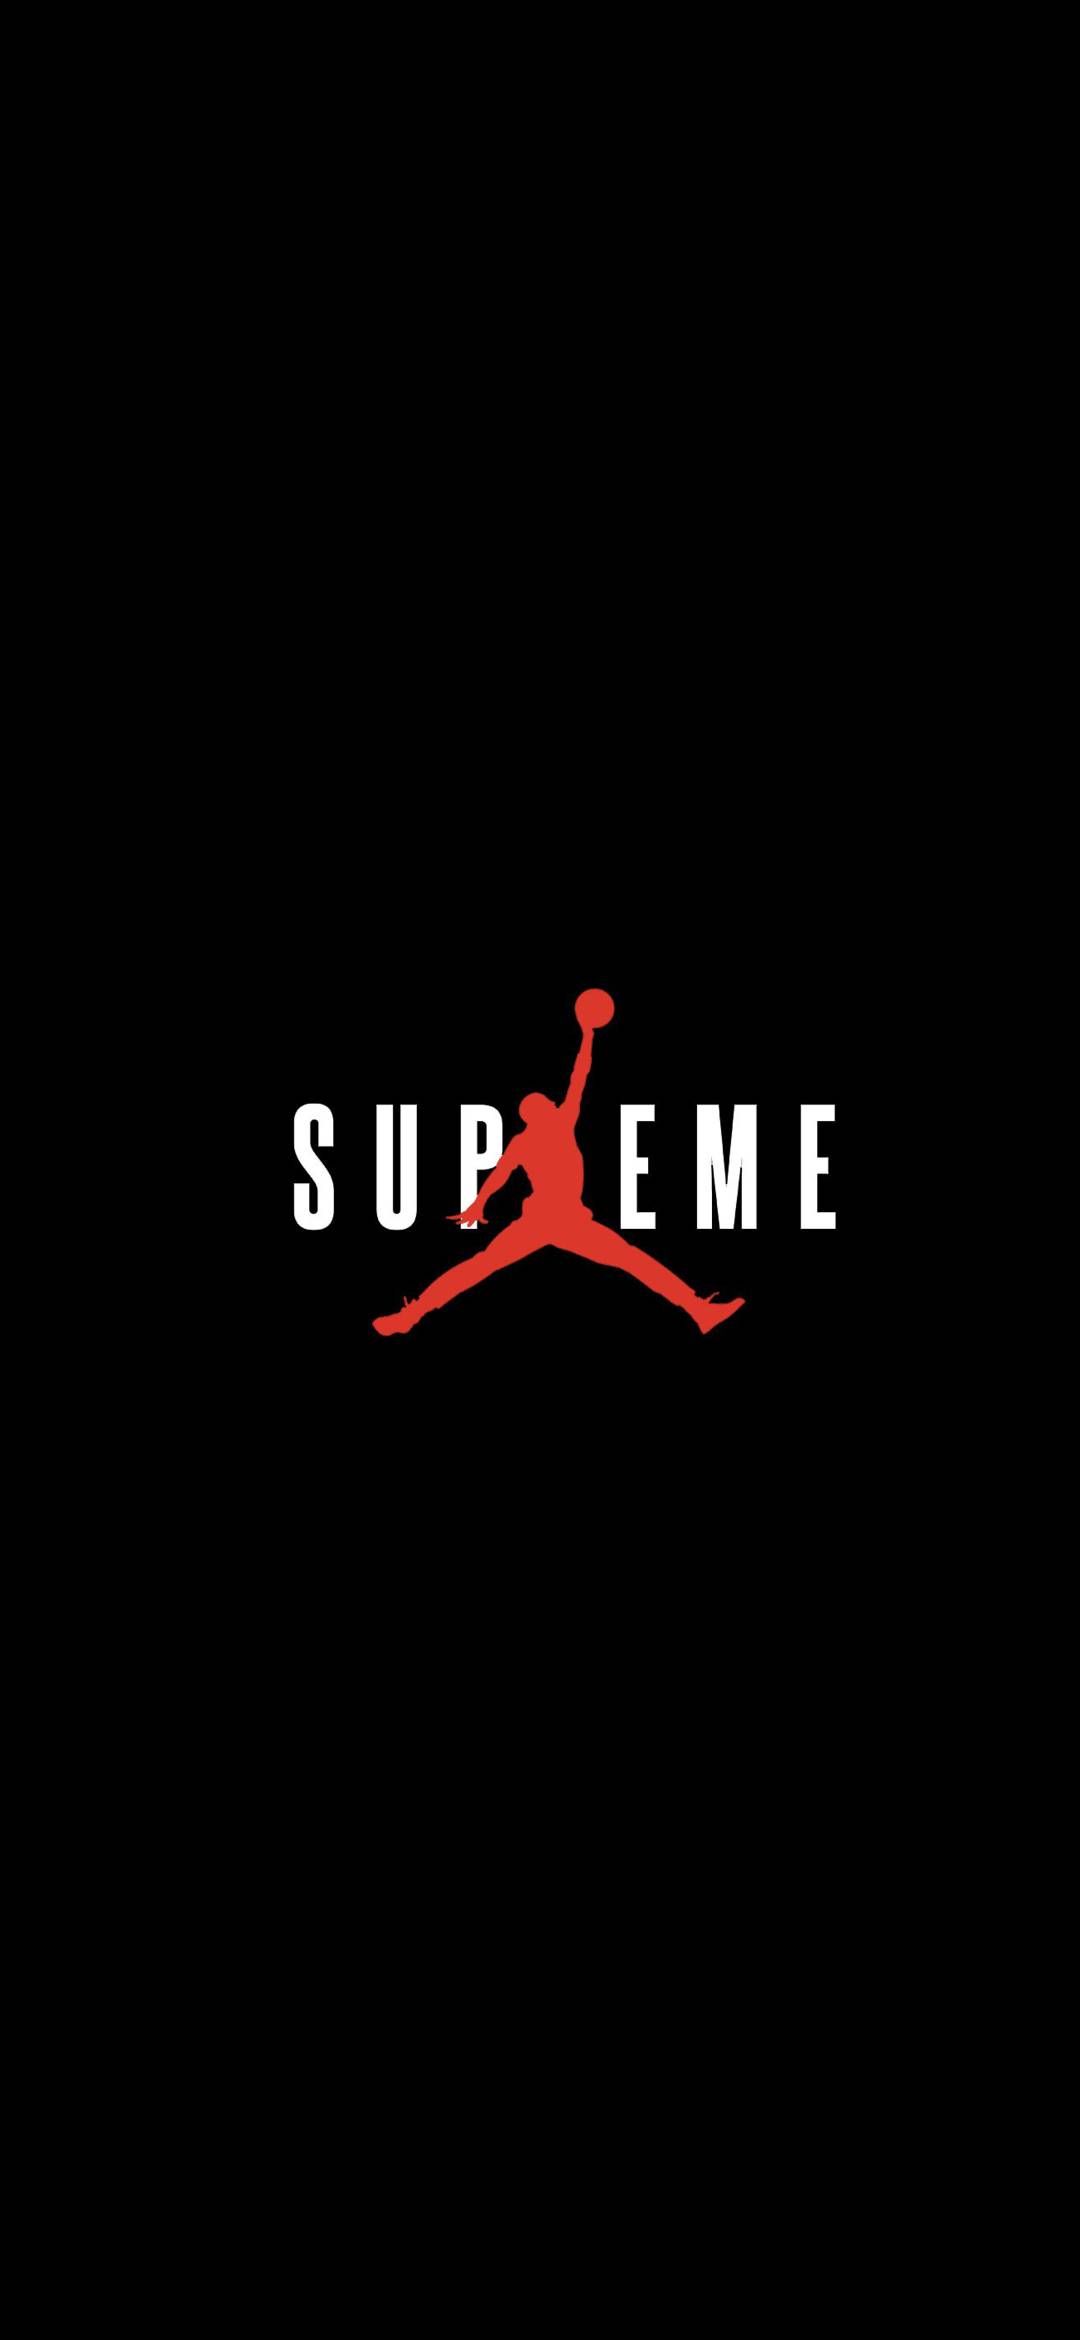 Supreme Iphone 5 Wallpapers Top Free Supreme Iphone 5 Backgrounds Wallpaperaccess